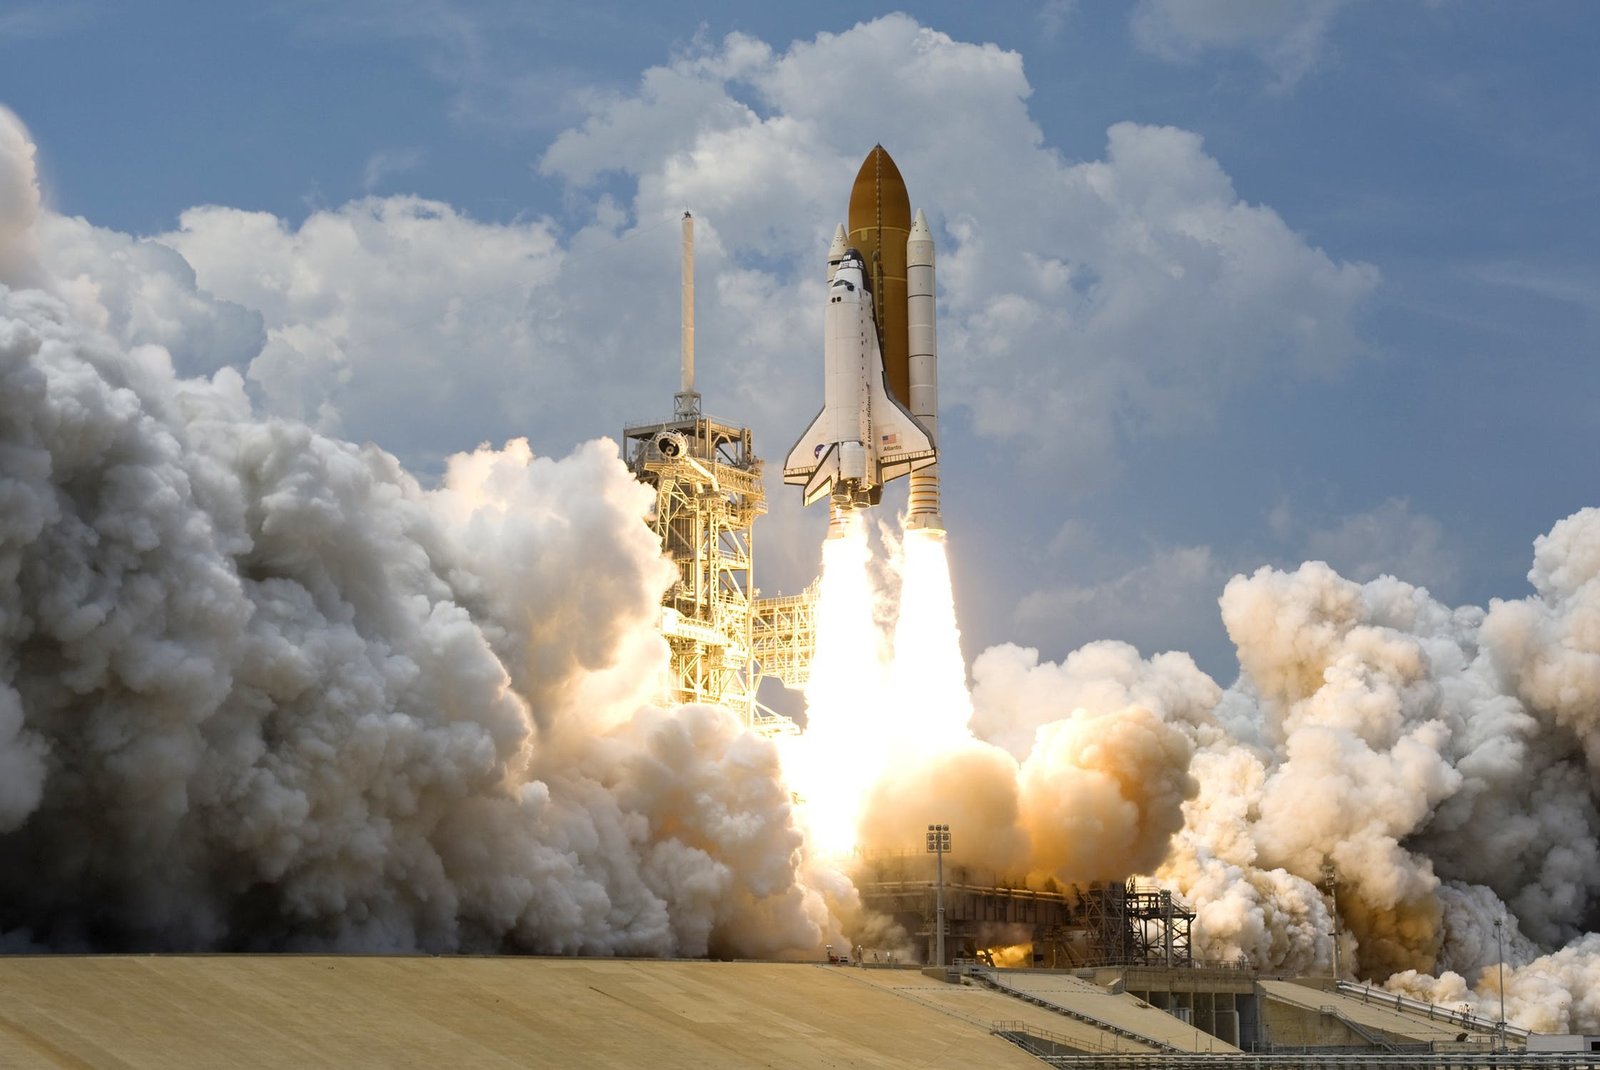 More information about "STS-135: Final Launch of the Space Shuttle Program"